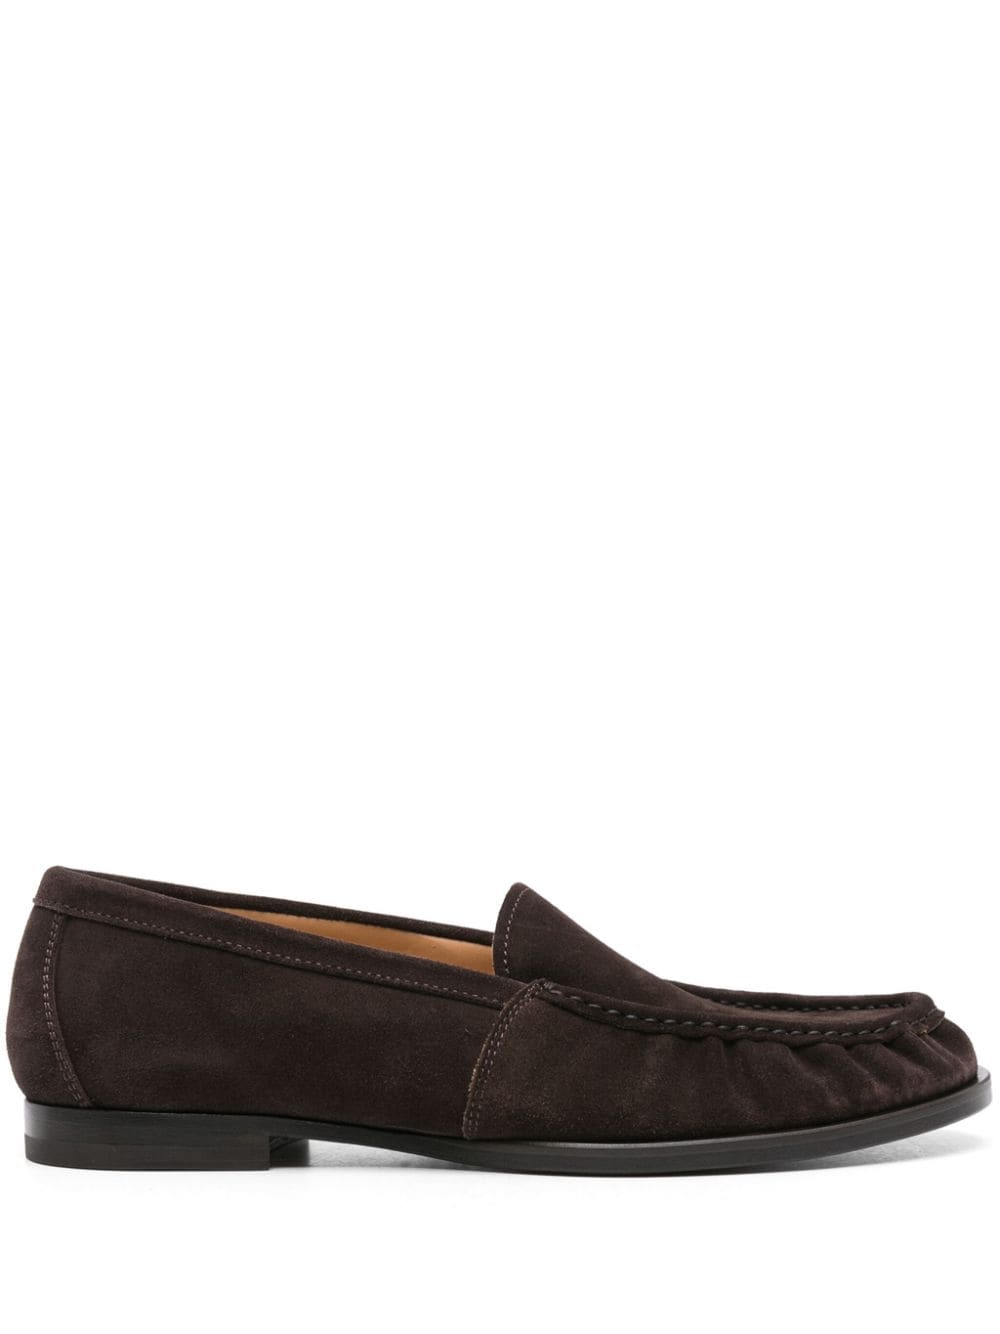 Alain suede loafers